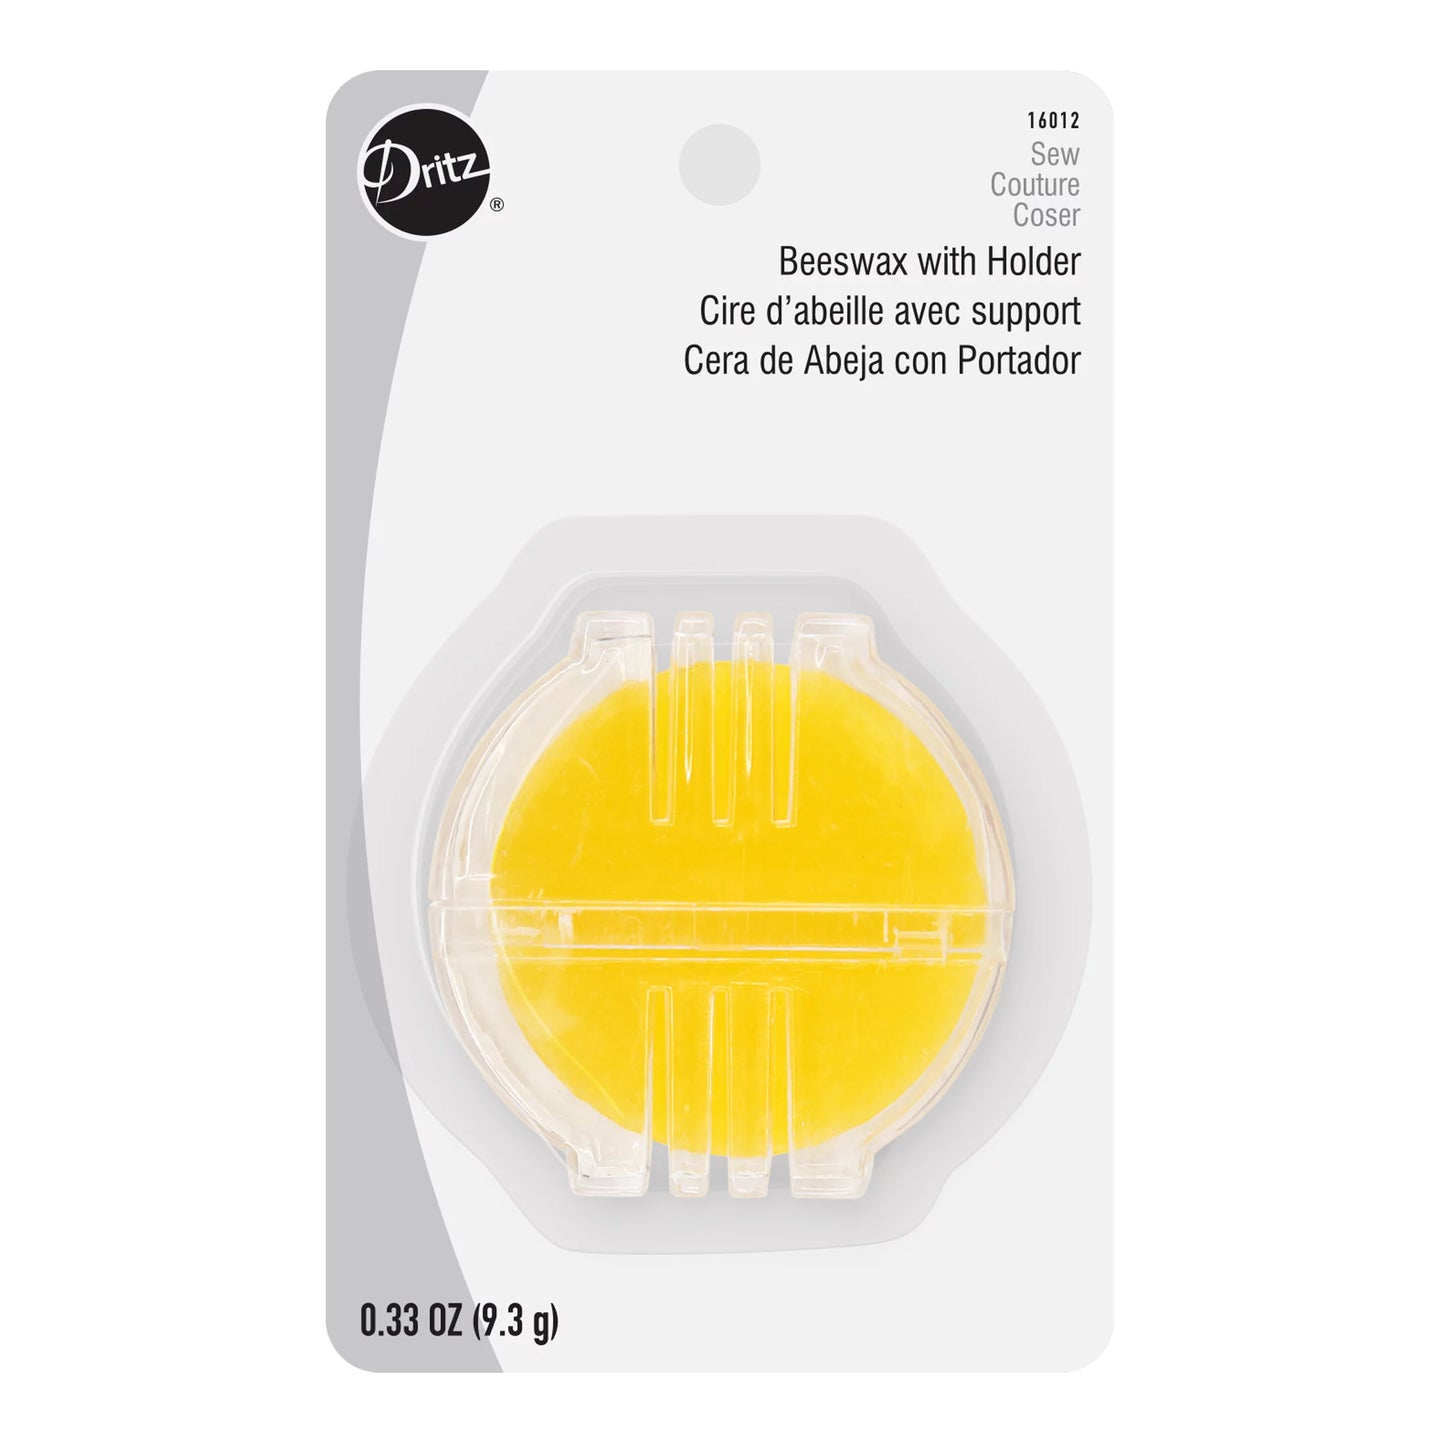 Dritz Beeswax With Holder